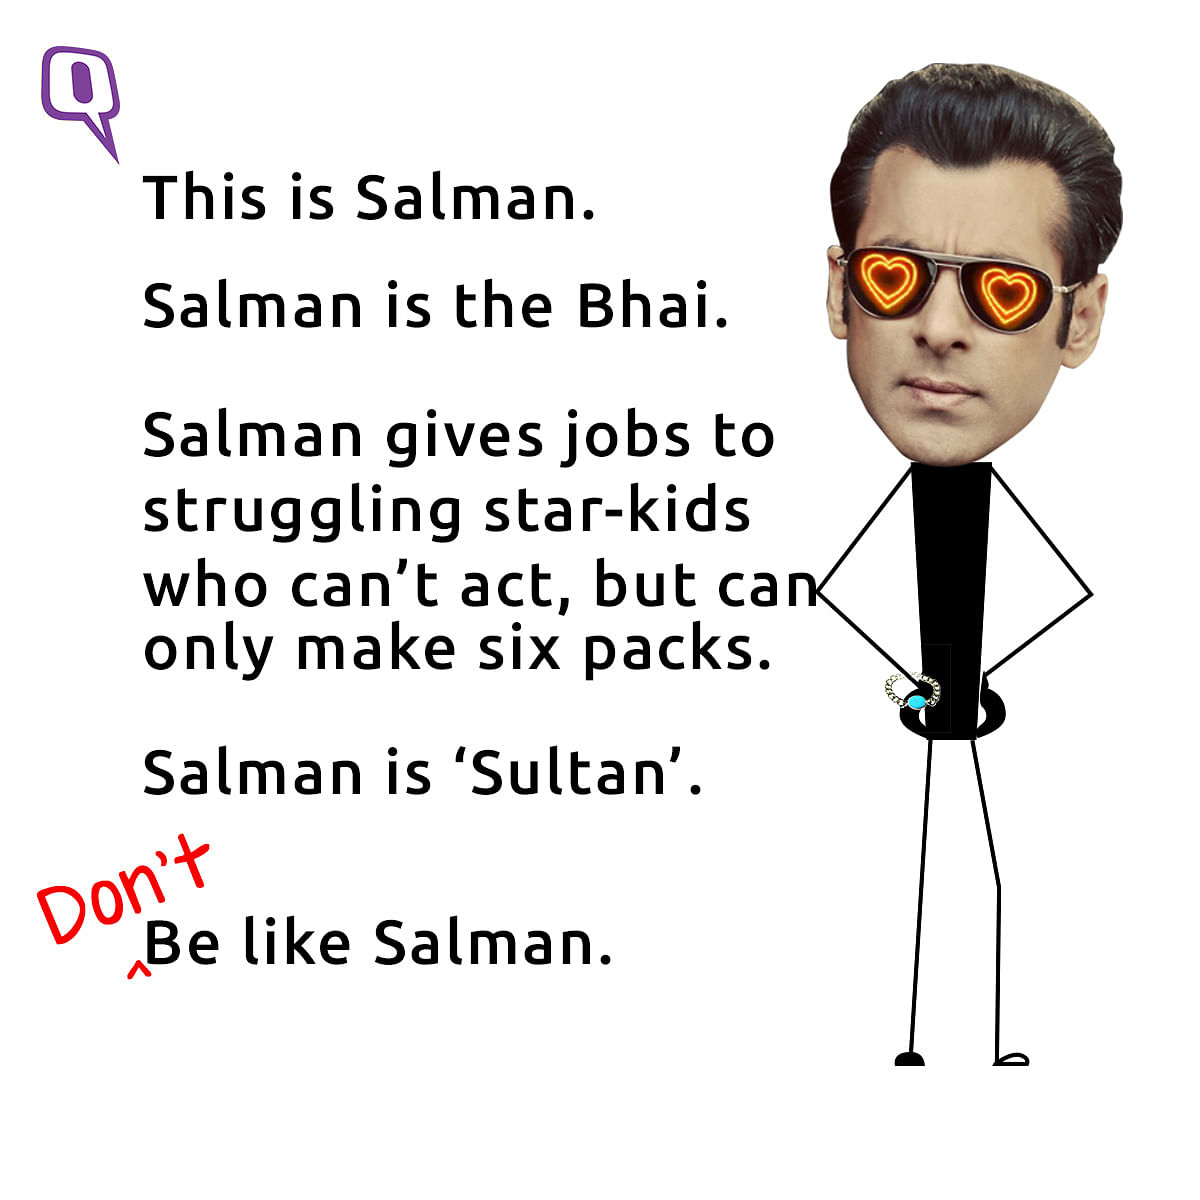 Let’s talk about bhai who, turns out, is not that bhai-like.